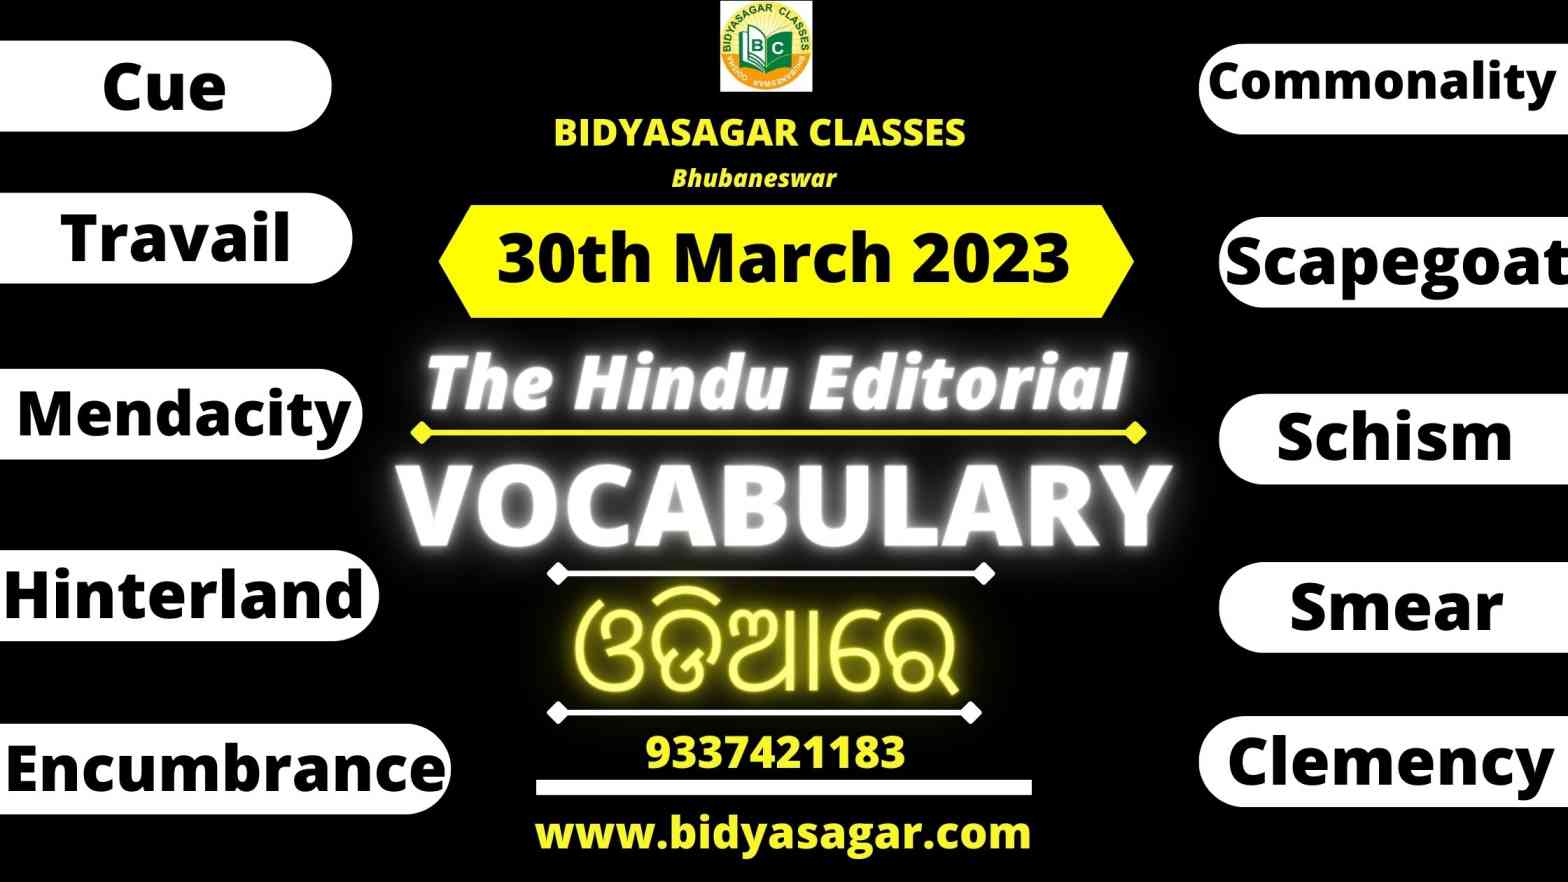 The Hindu Editorial Vocabulary of 30th March 2023